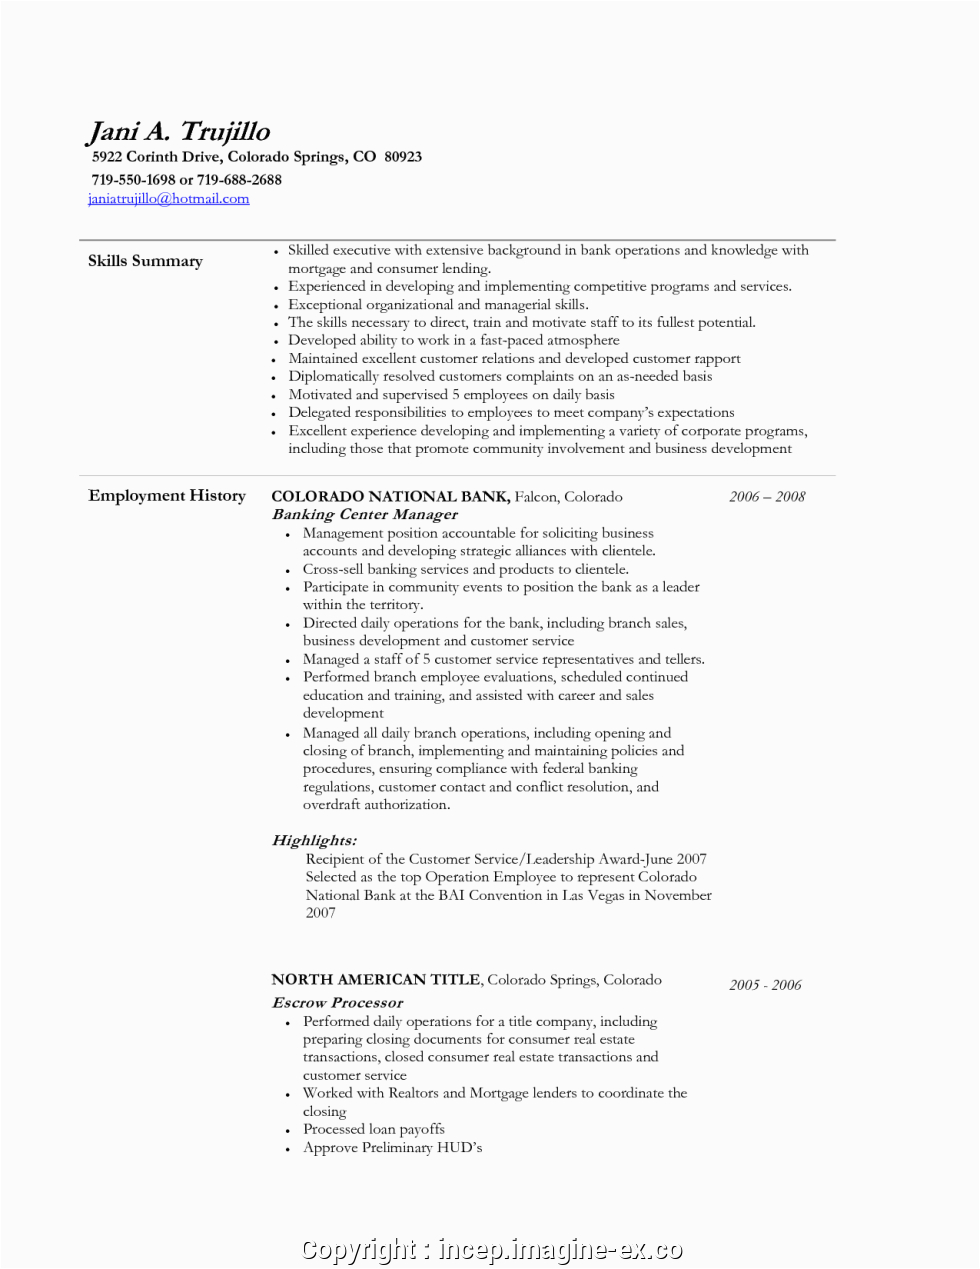 Sample Resume for Operations Manager In Banking Creative Sample Resume for Banking Operations Manager